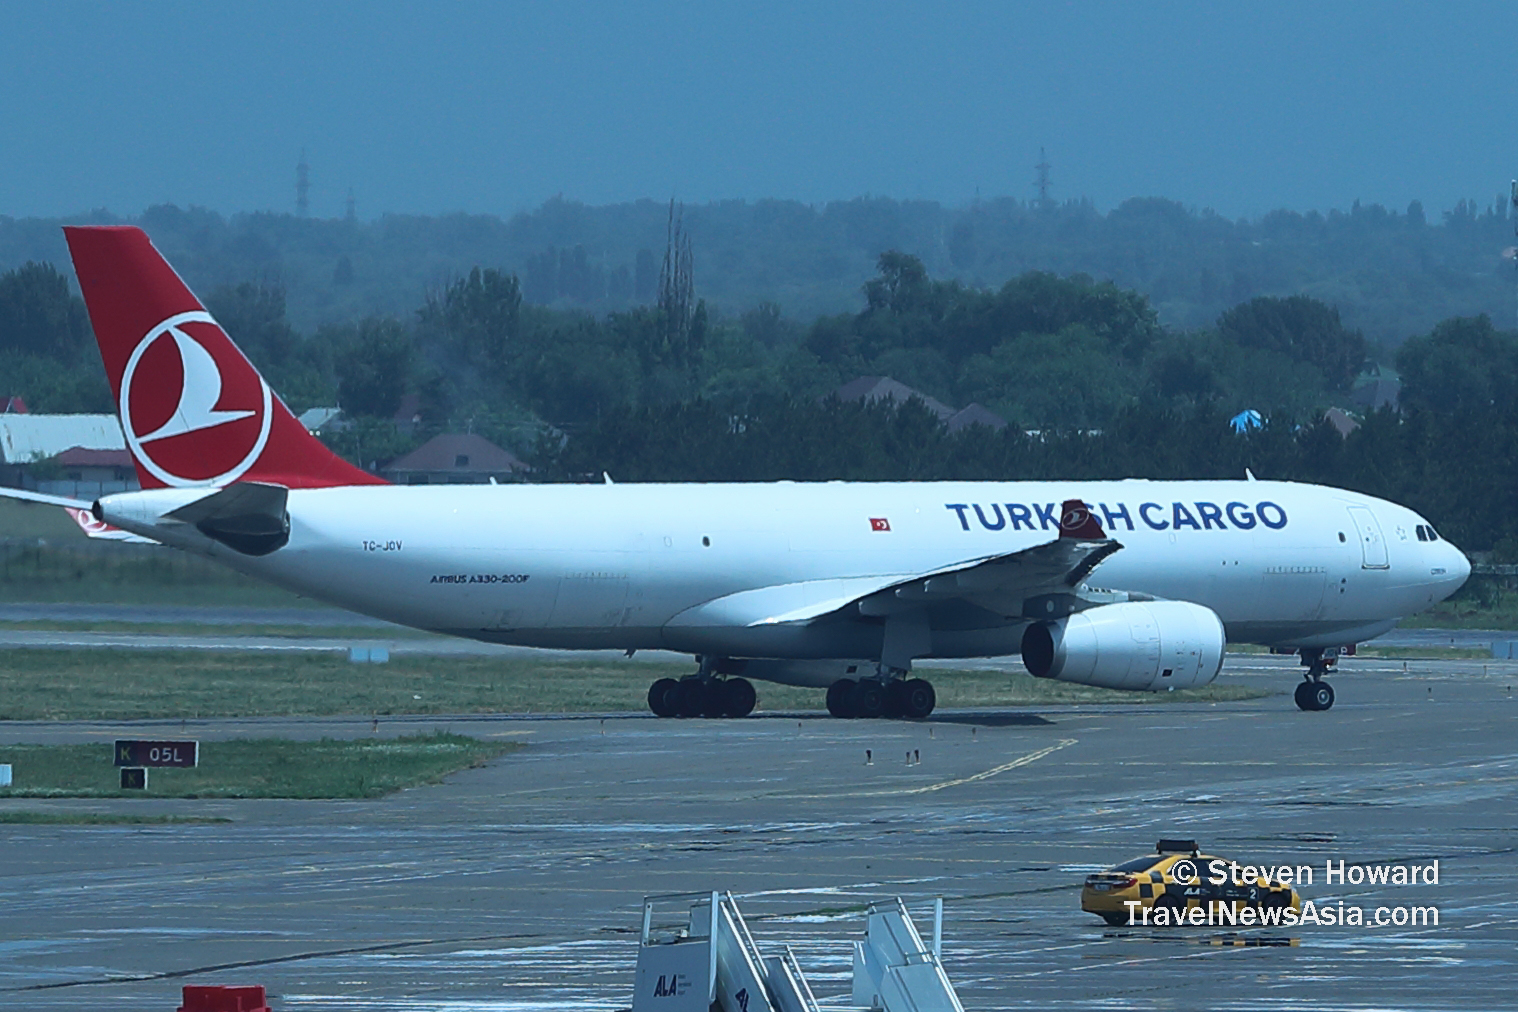 Turkish Cargo A330-200F reg: TC-JOV at ALA. Picture by Steven Howard of TravelNewsAsia.com Click to enlarge.